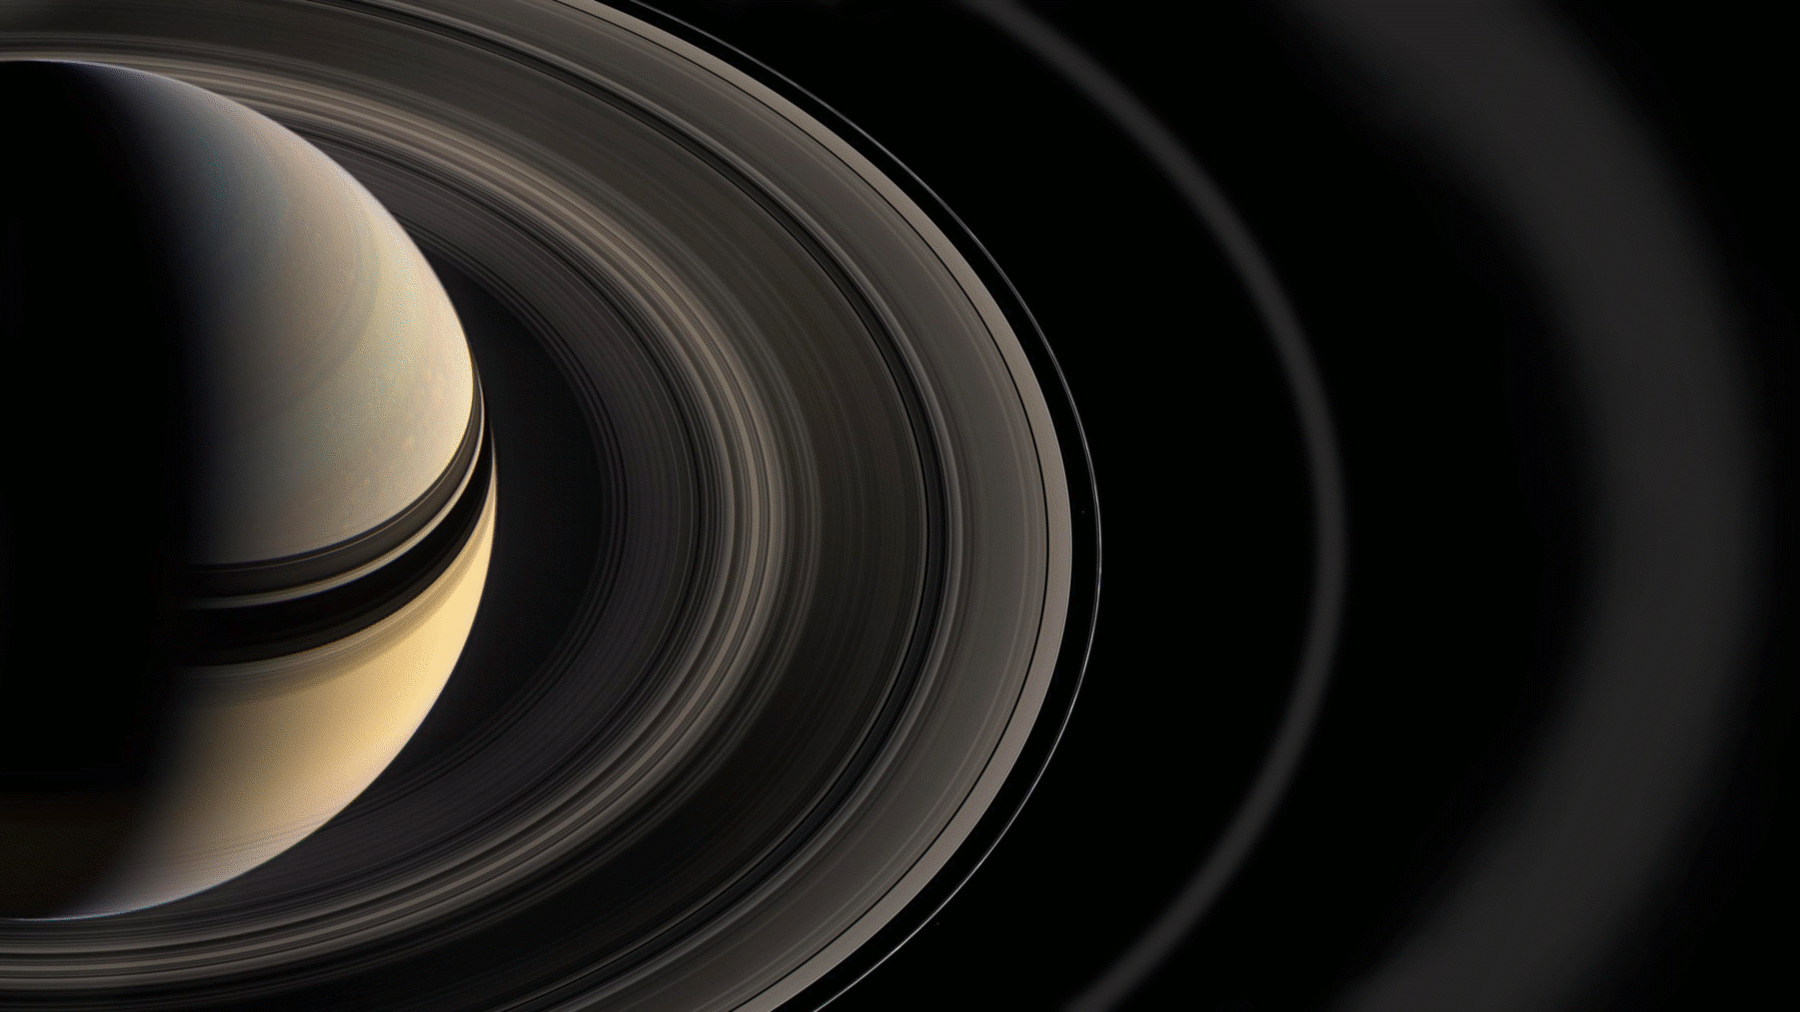 Animated GIF highlighting Saturn's rings in discovery order.